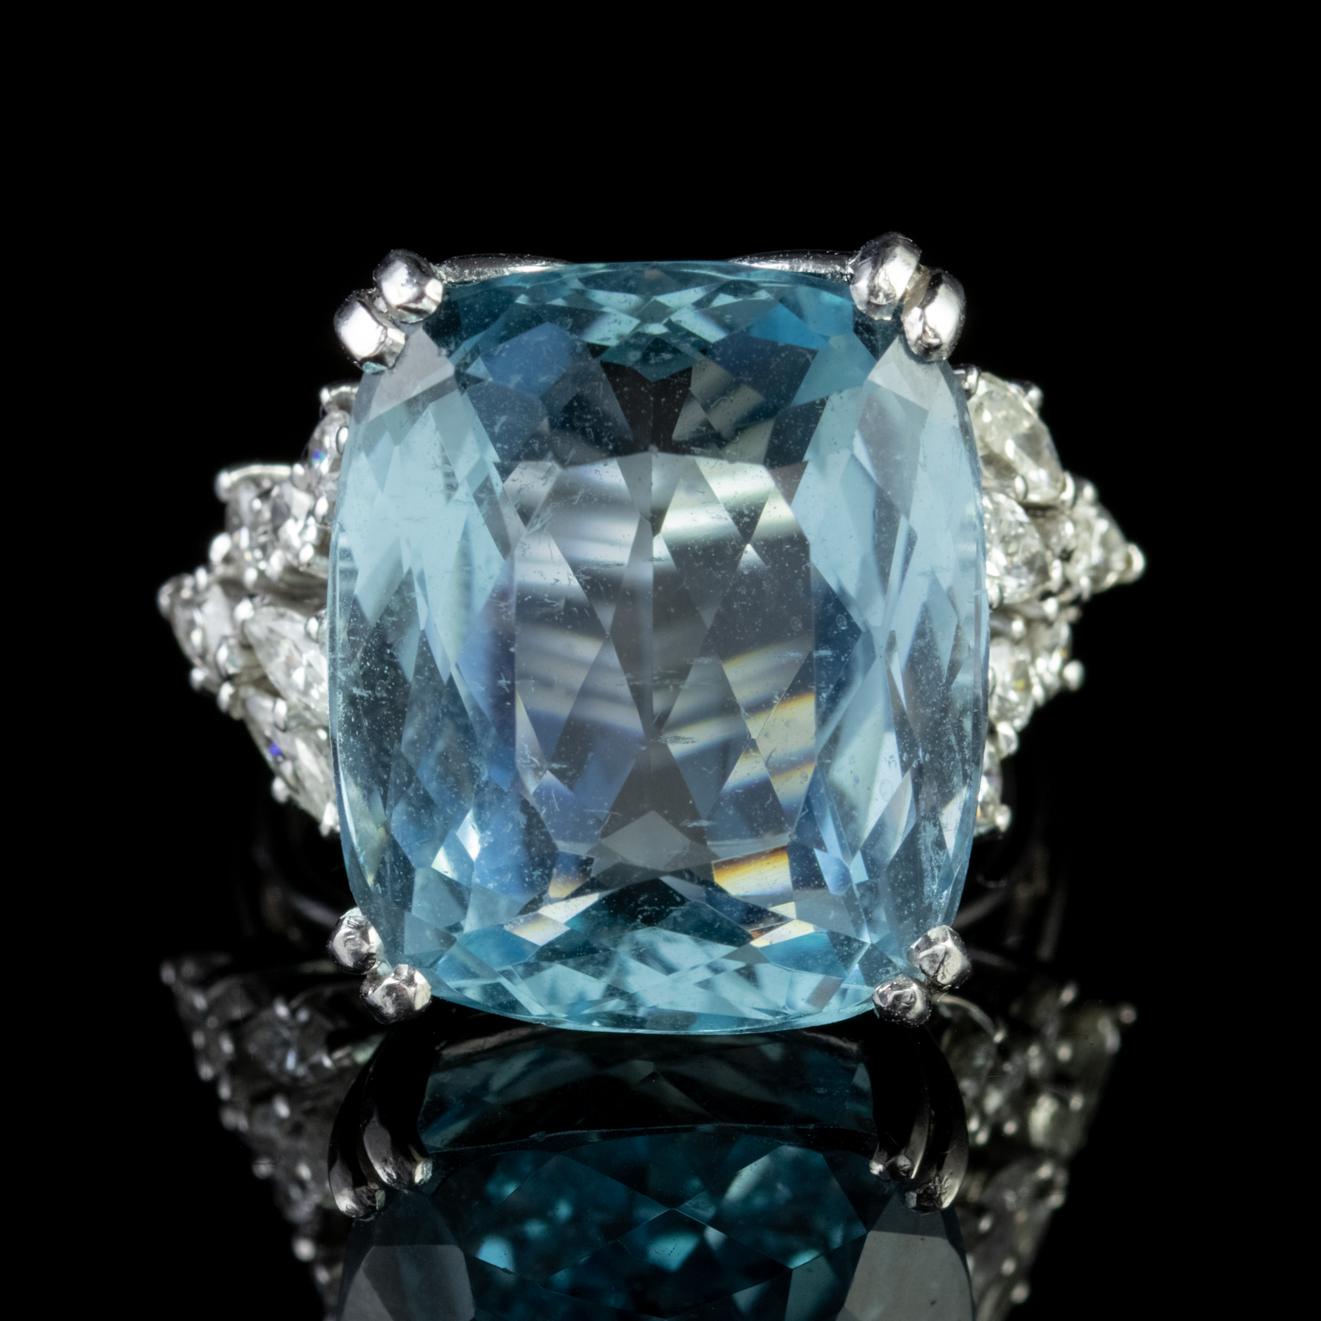 A magnificent Art Deco cocktail ring boasting a spectacular deep blue Aquamarine which is approx. 25ct with decorative shoulders set with old round cut and Marquise cut Diamonds.

Aquamarine is adored for its beautiful clear Ocean blue colour which